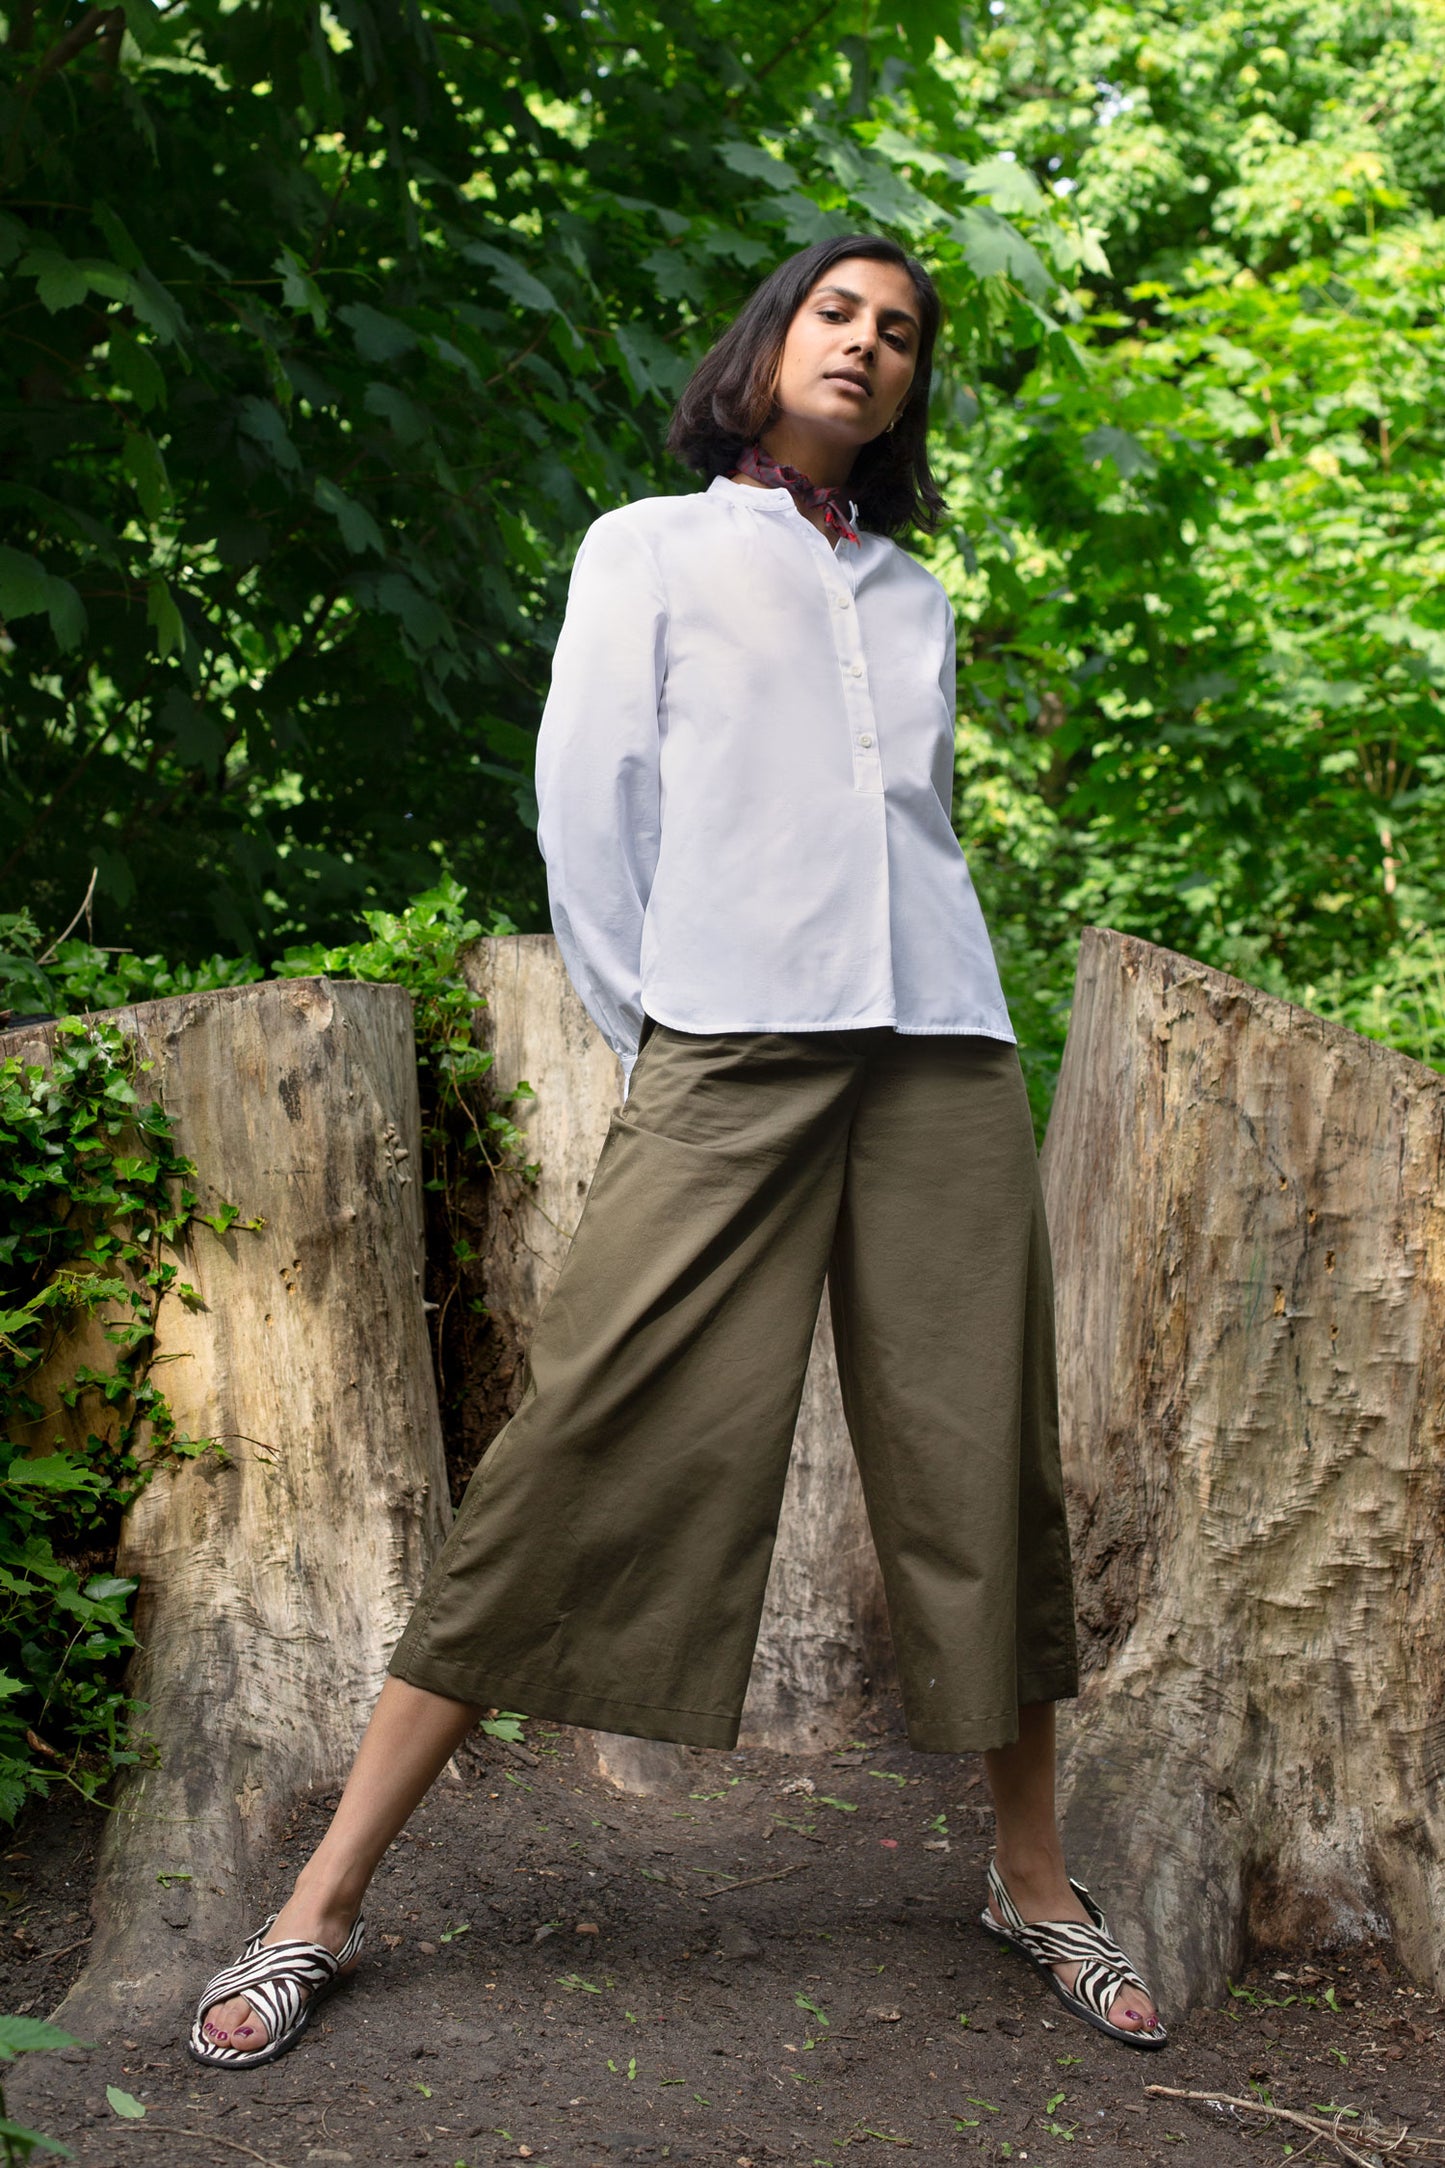 Model stands, legs in wide stance, in front of tree stumps and greenery. She wears Saywood's white Marie Aline Blouse with a red check neckerchief tied round her neck. Worn with Saywood's Amelia wide leg trouser in khaki and black and white zebra print sandals.